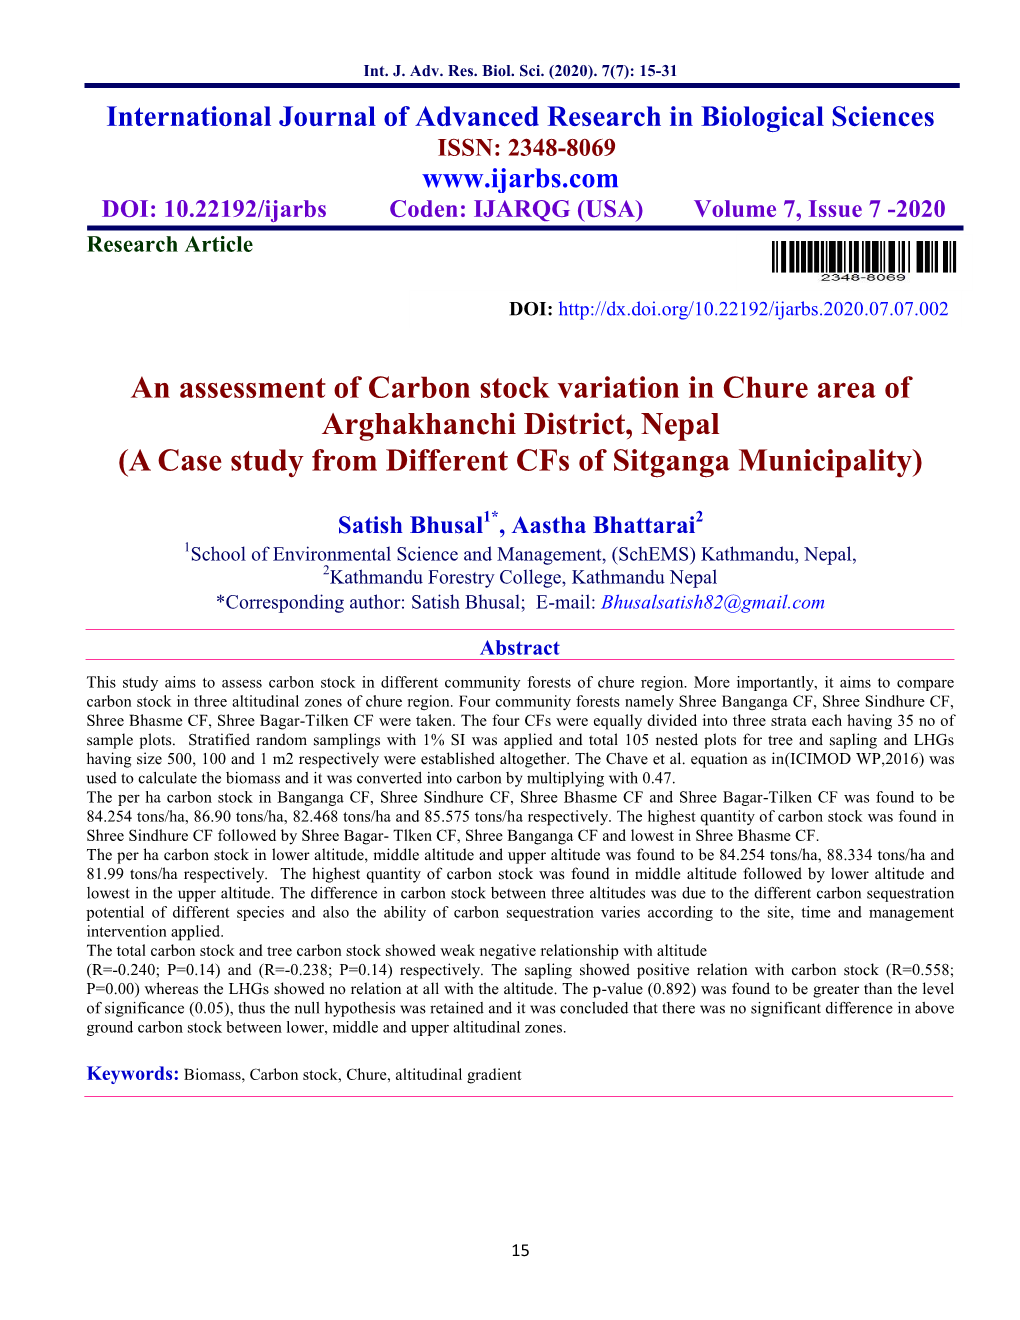 An Assessment of Carbon Stock Variation in Chure Area of Arghakhanchi District, Nepal (A Case Study from Different Cfs of Sitganga Municipality)